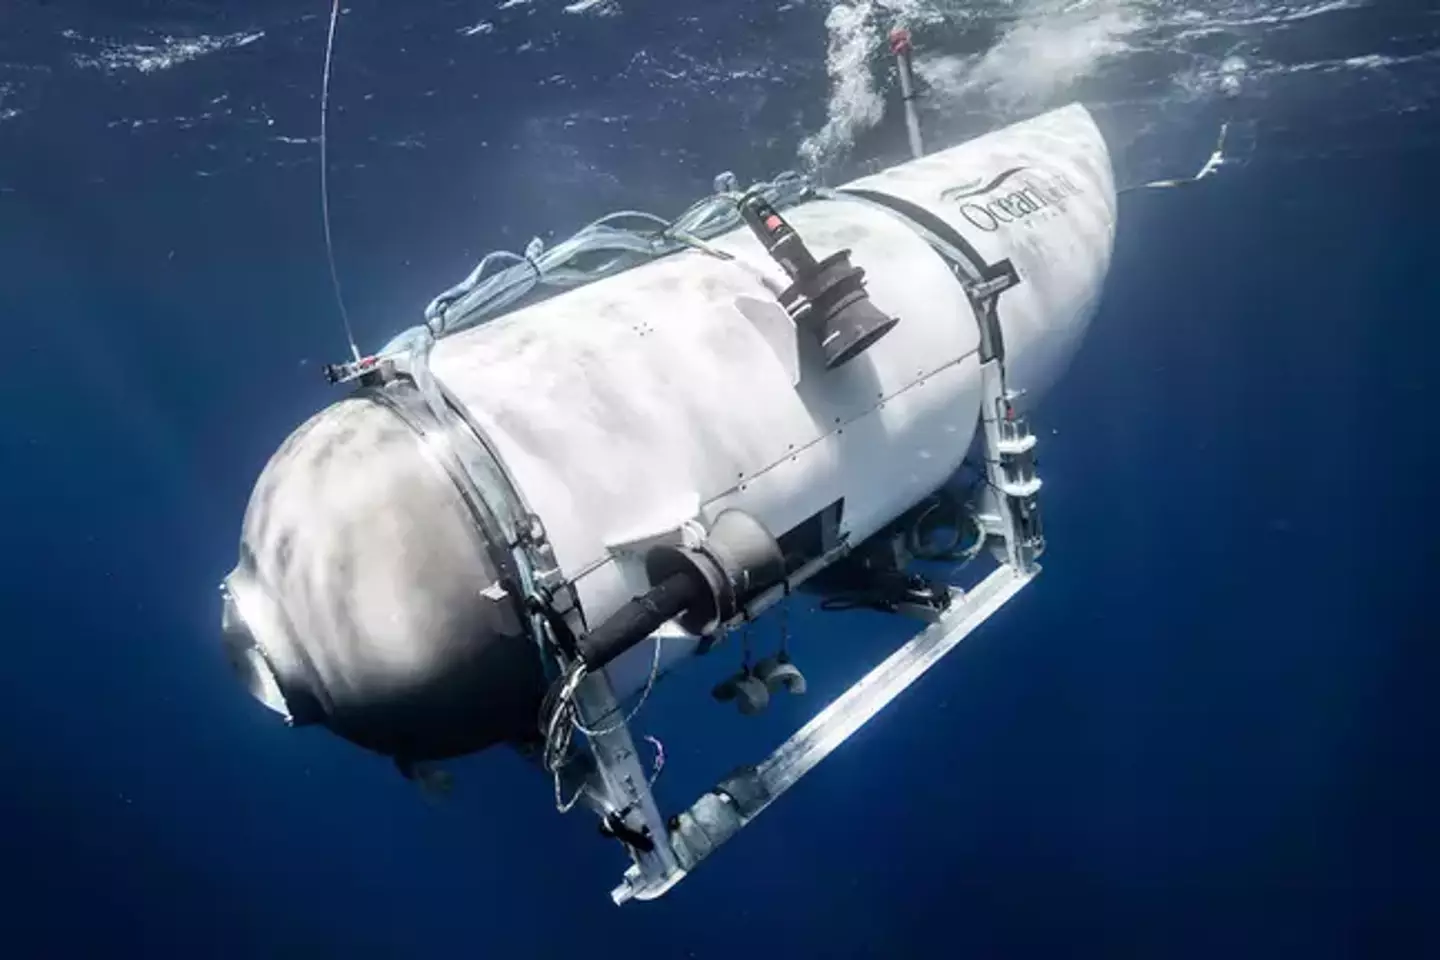 The Titan submersible has five people on board and rescue attempts have heard 'banging noises' near where it went missing.